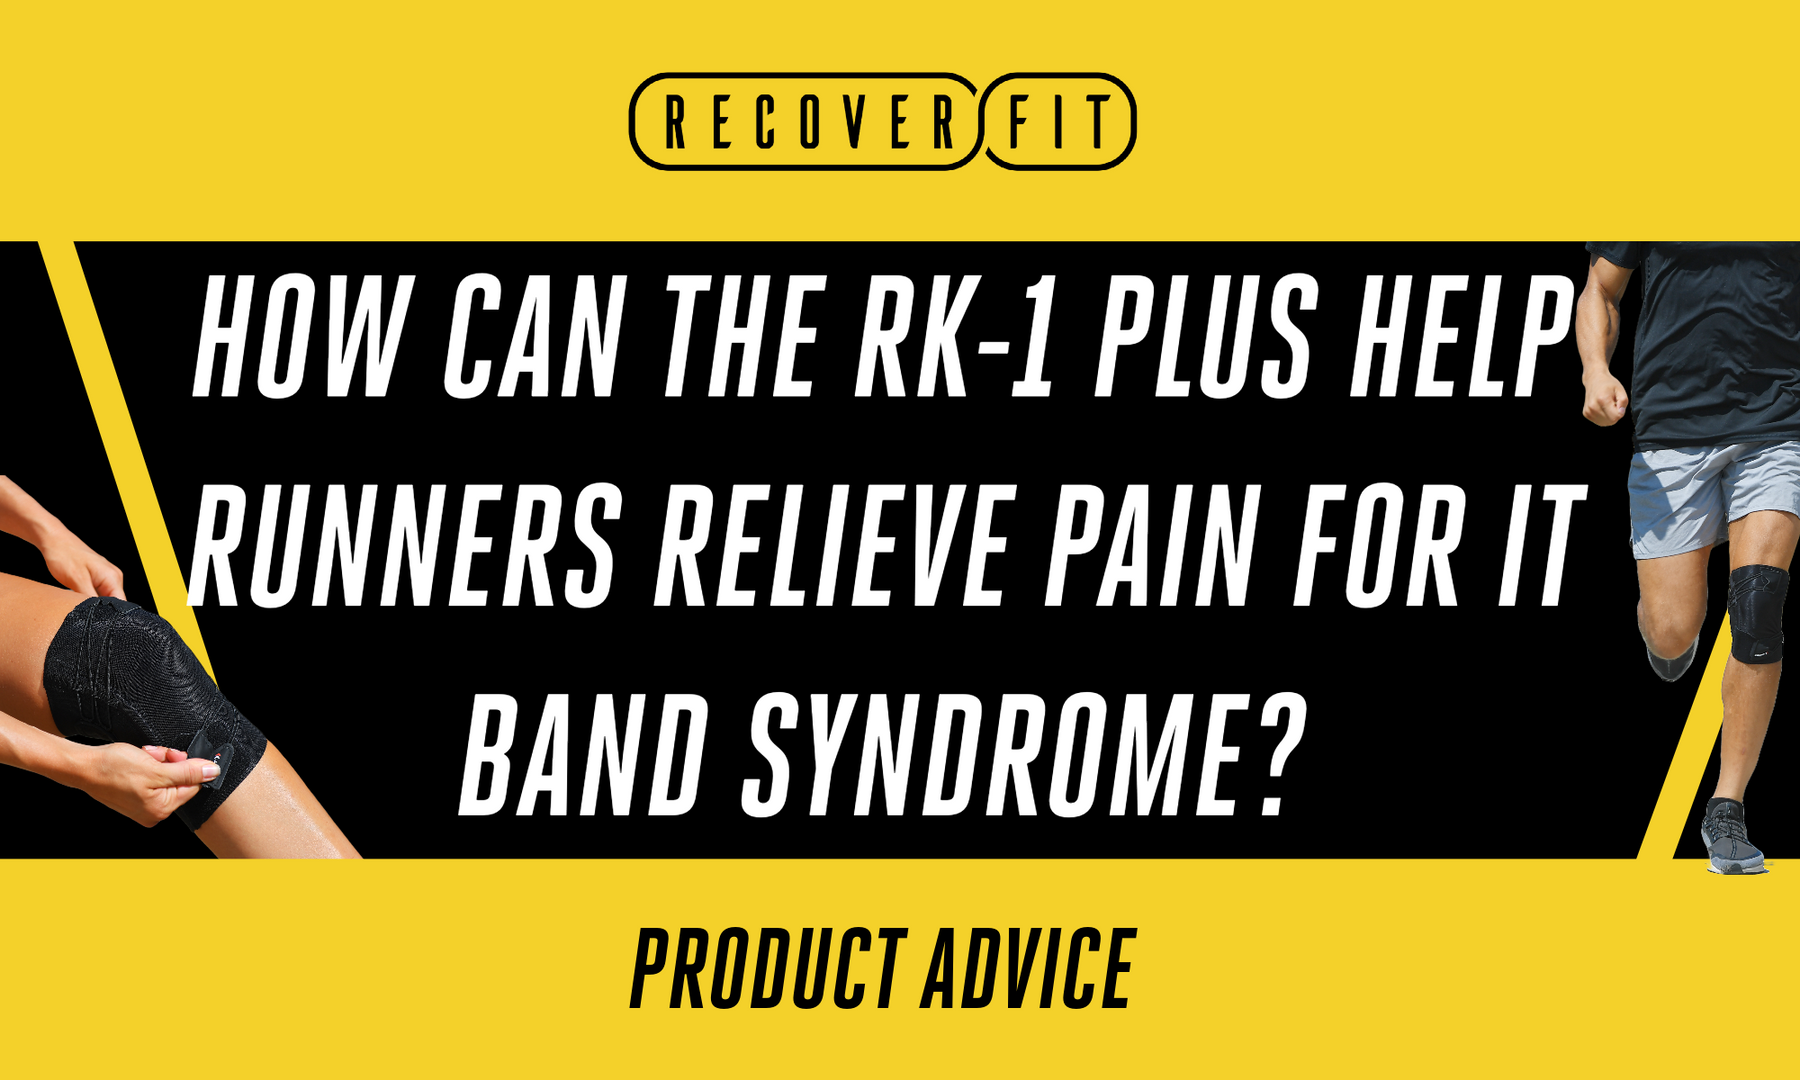 How can the RK-1 plus help runners relieve pain for IT band syndrome?